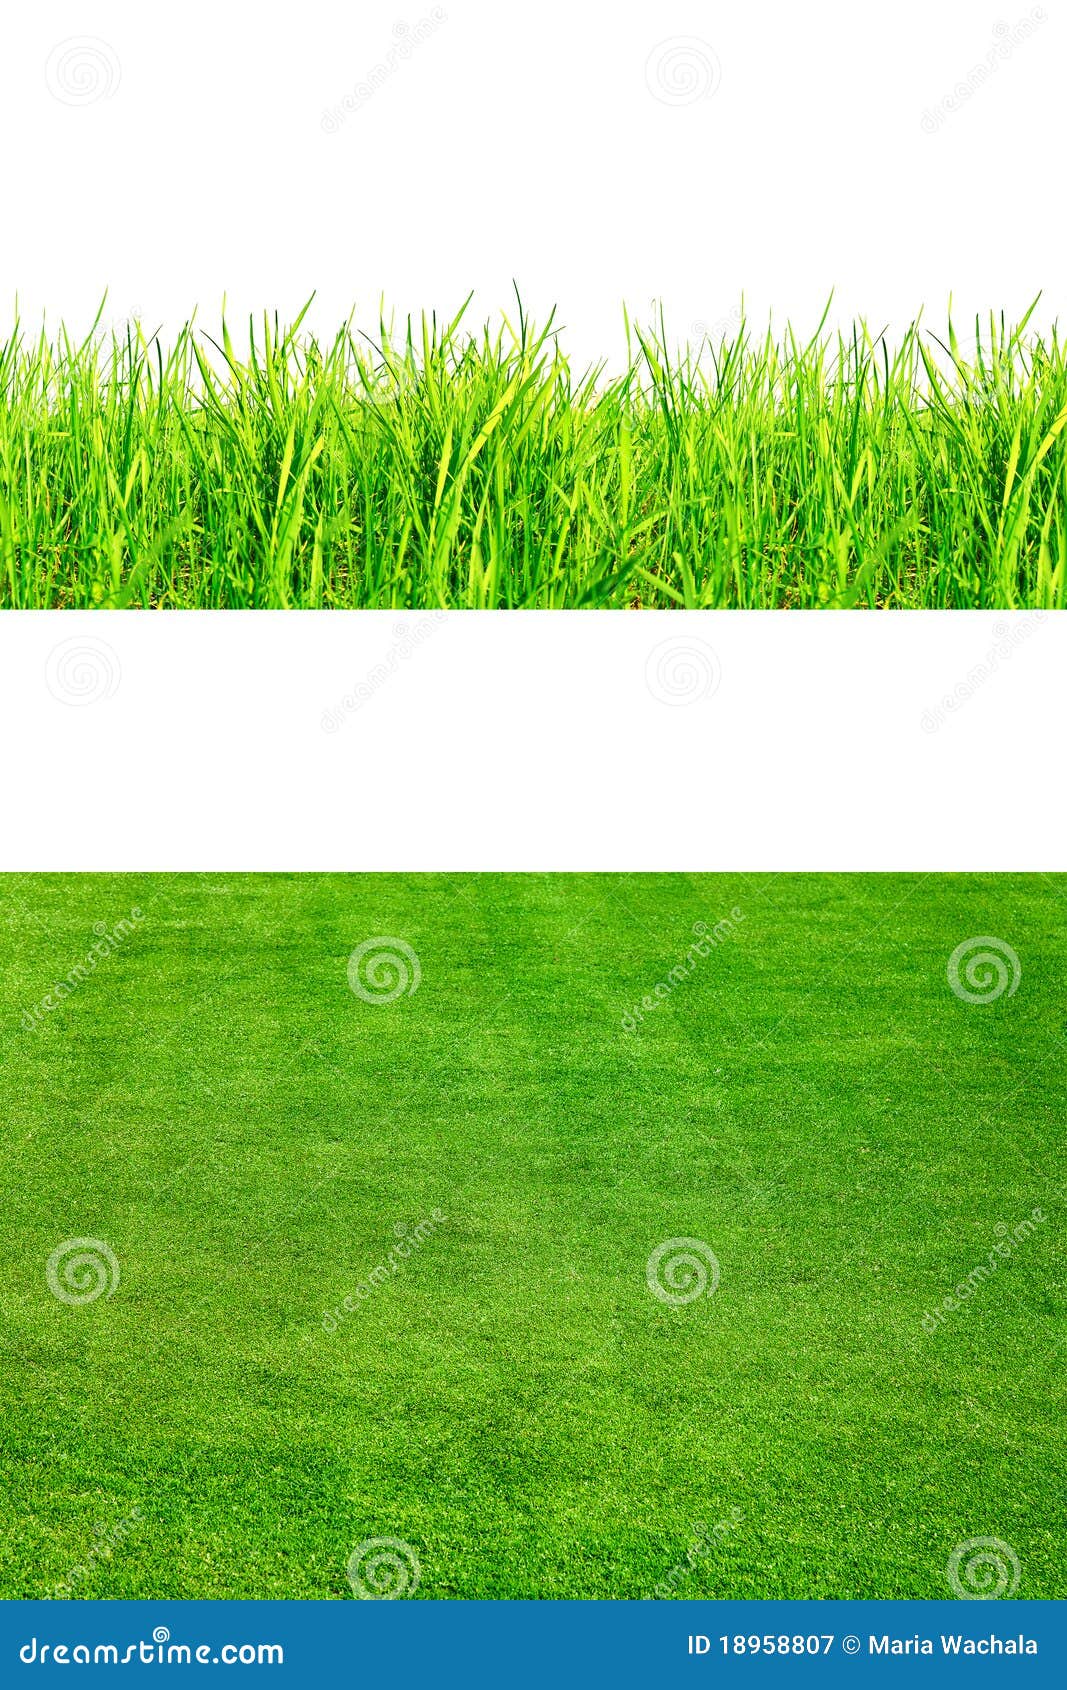 Fresh Spring Green Grass Isolated on White Stock Image - Image of ...